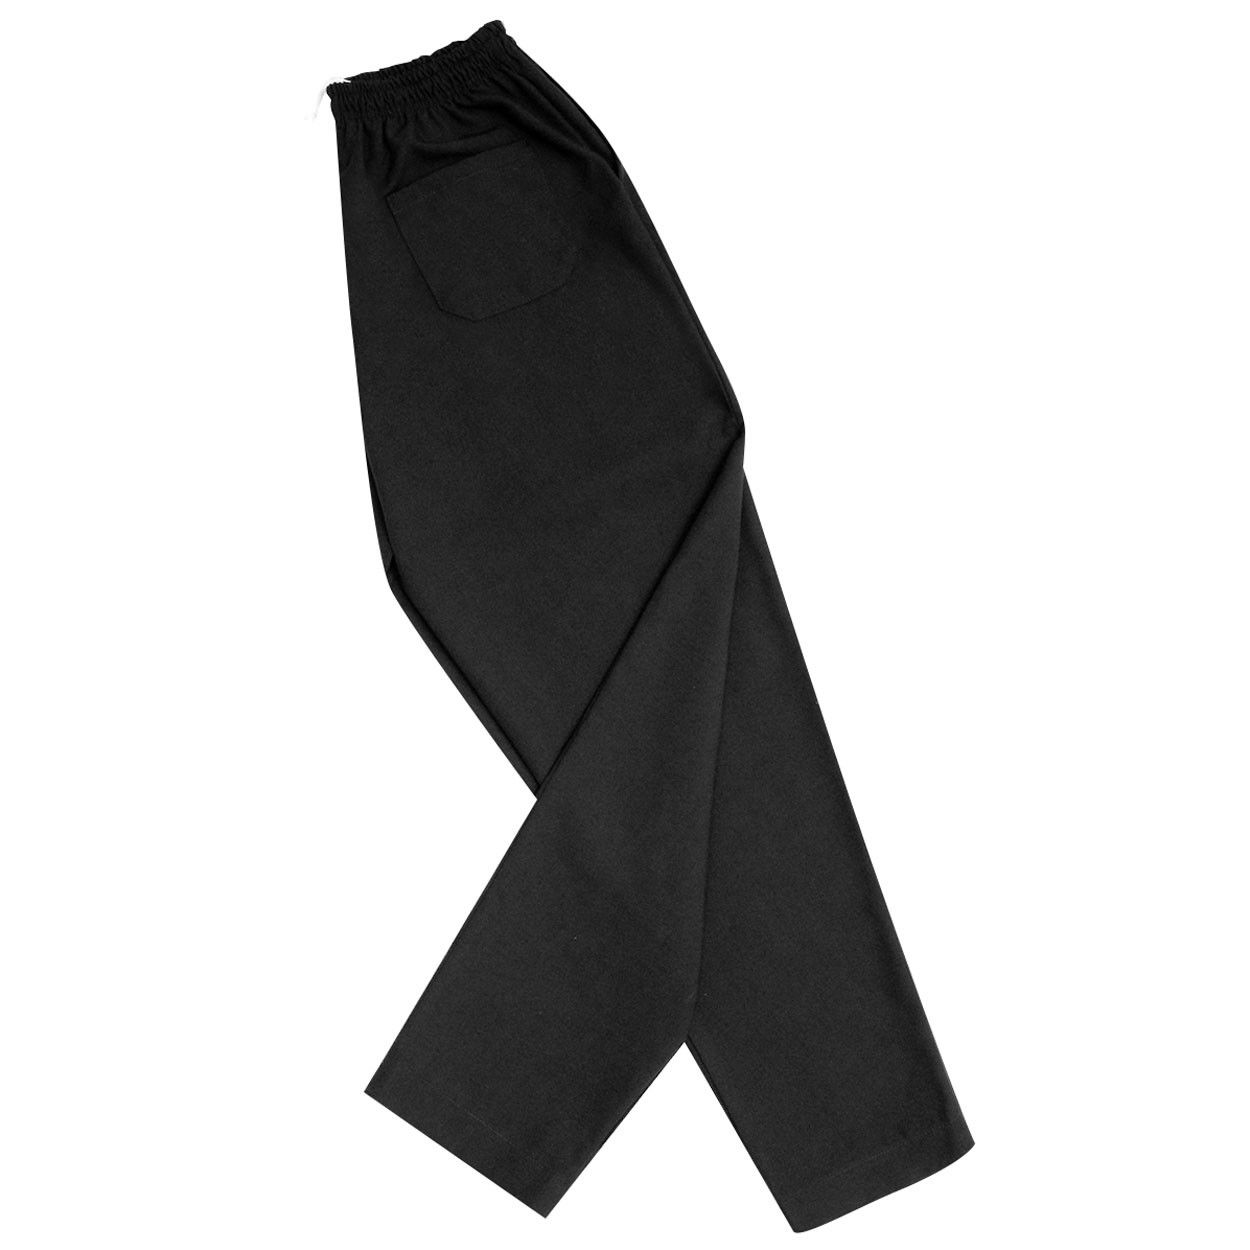 Baggy Chef Pants, Black by American Dawn Questions & Answers